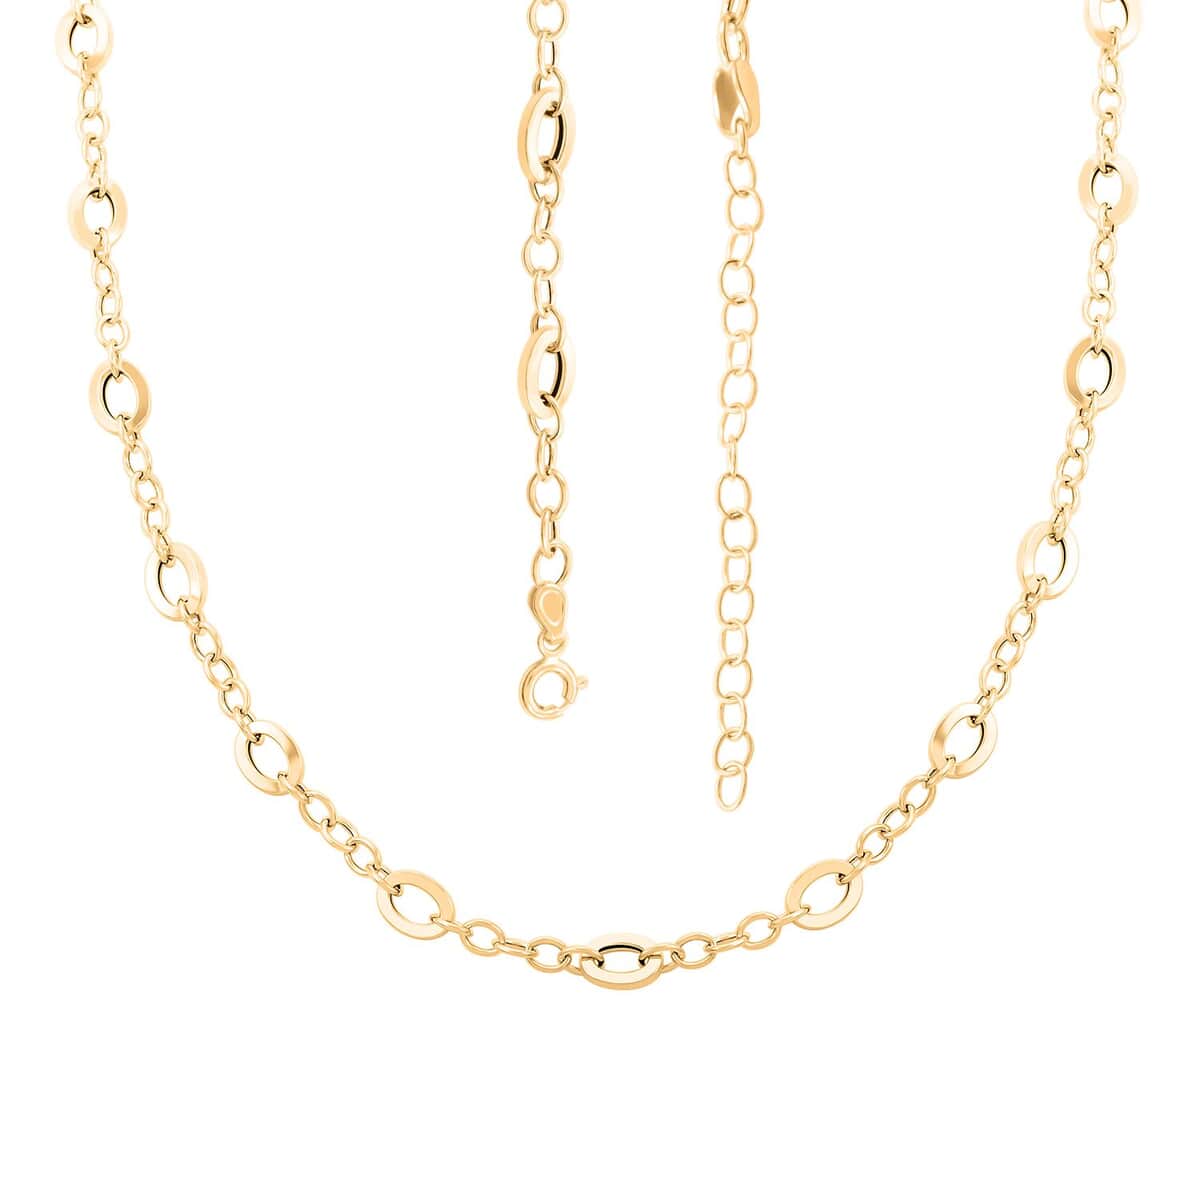 Preziosa Italian 14K Yellow Gold Chain Necklace 18-20 Inches 4.04 Grams image number 3